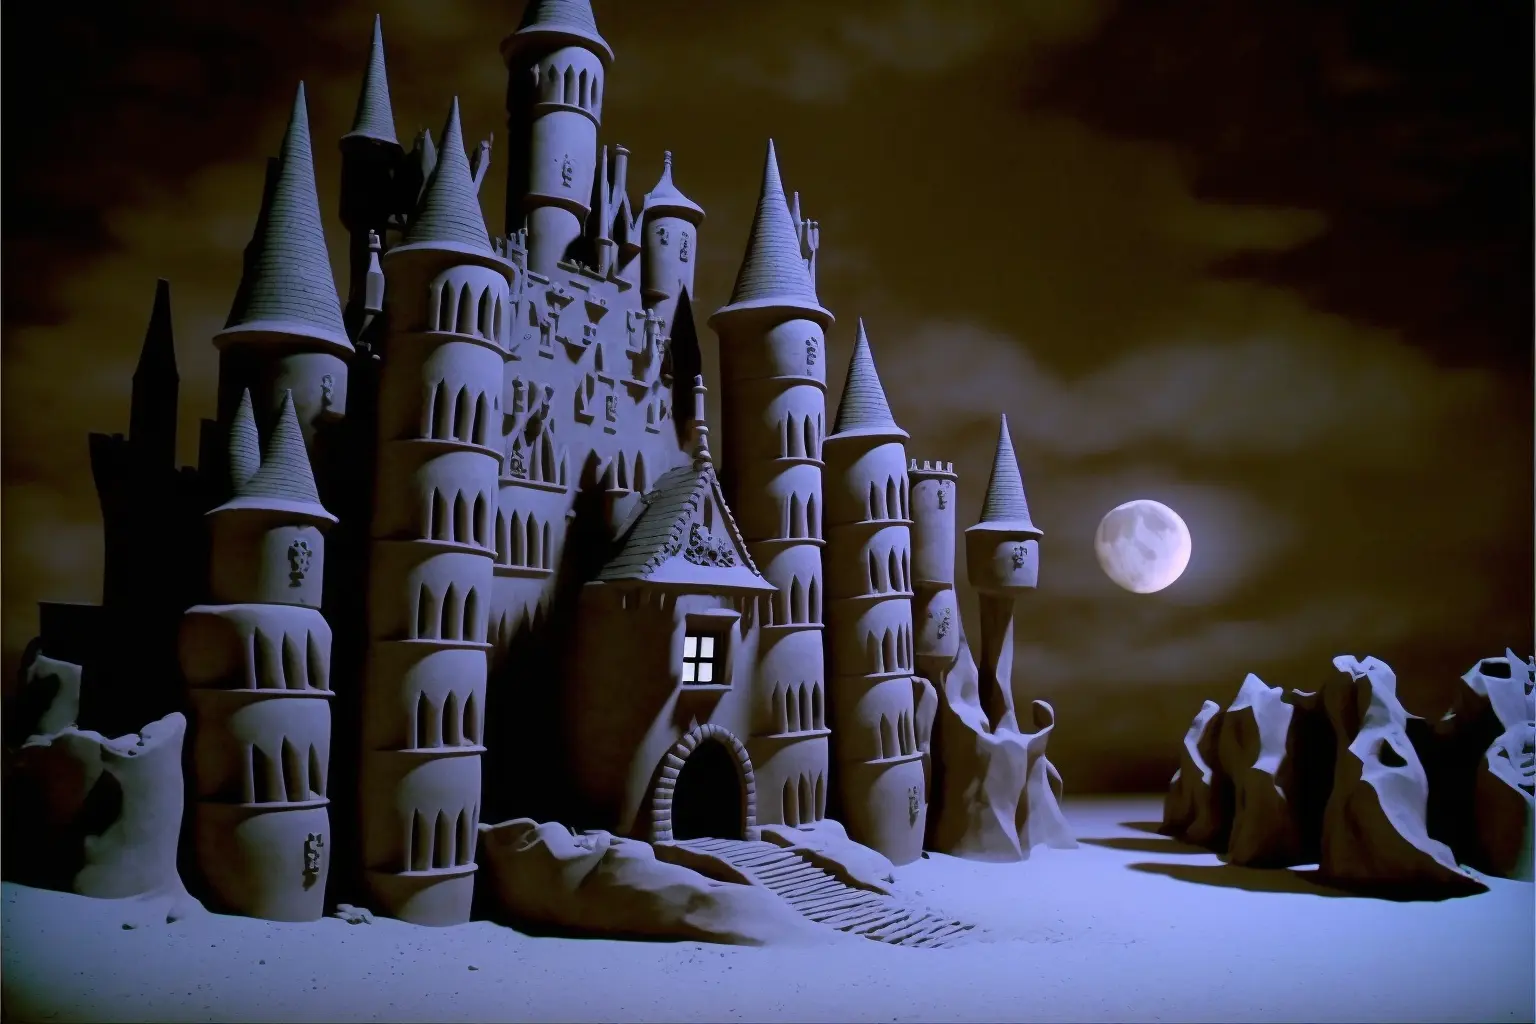 DVD screengrab from stop motion movie, claymation, hogwarts castle, directed by Tim Burton